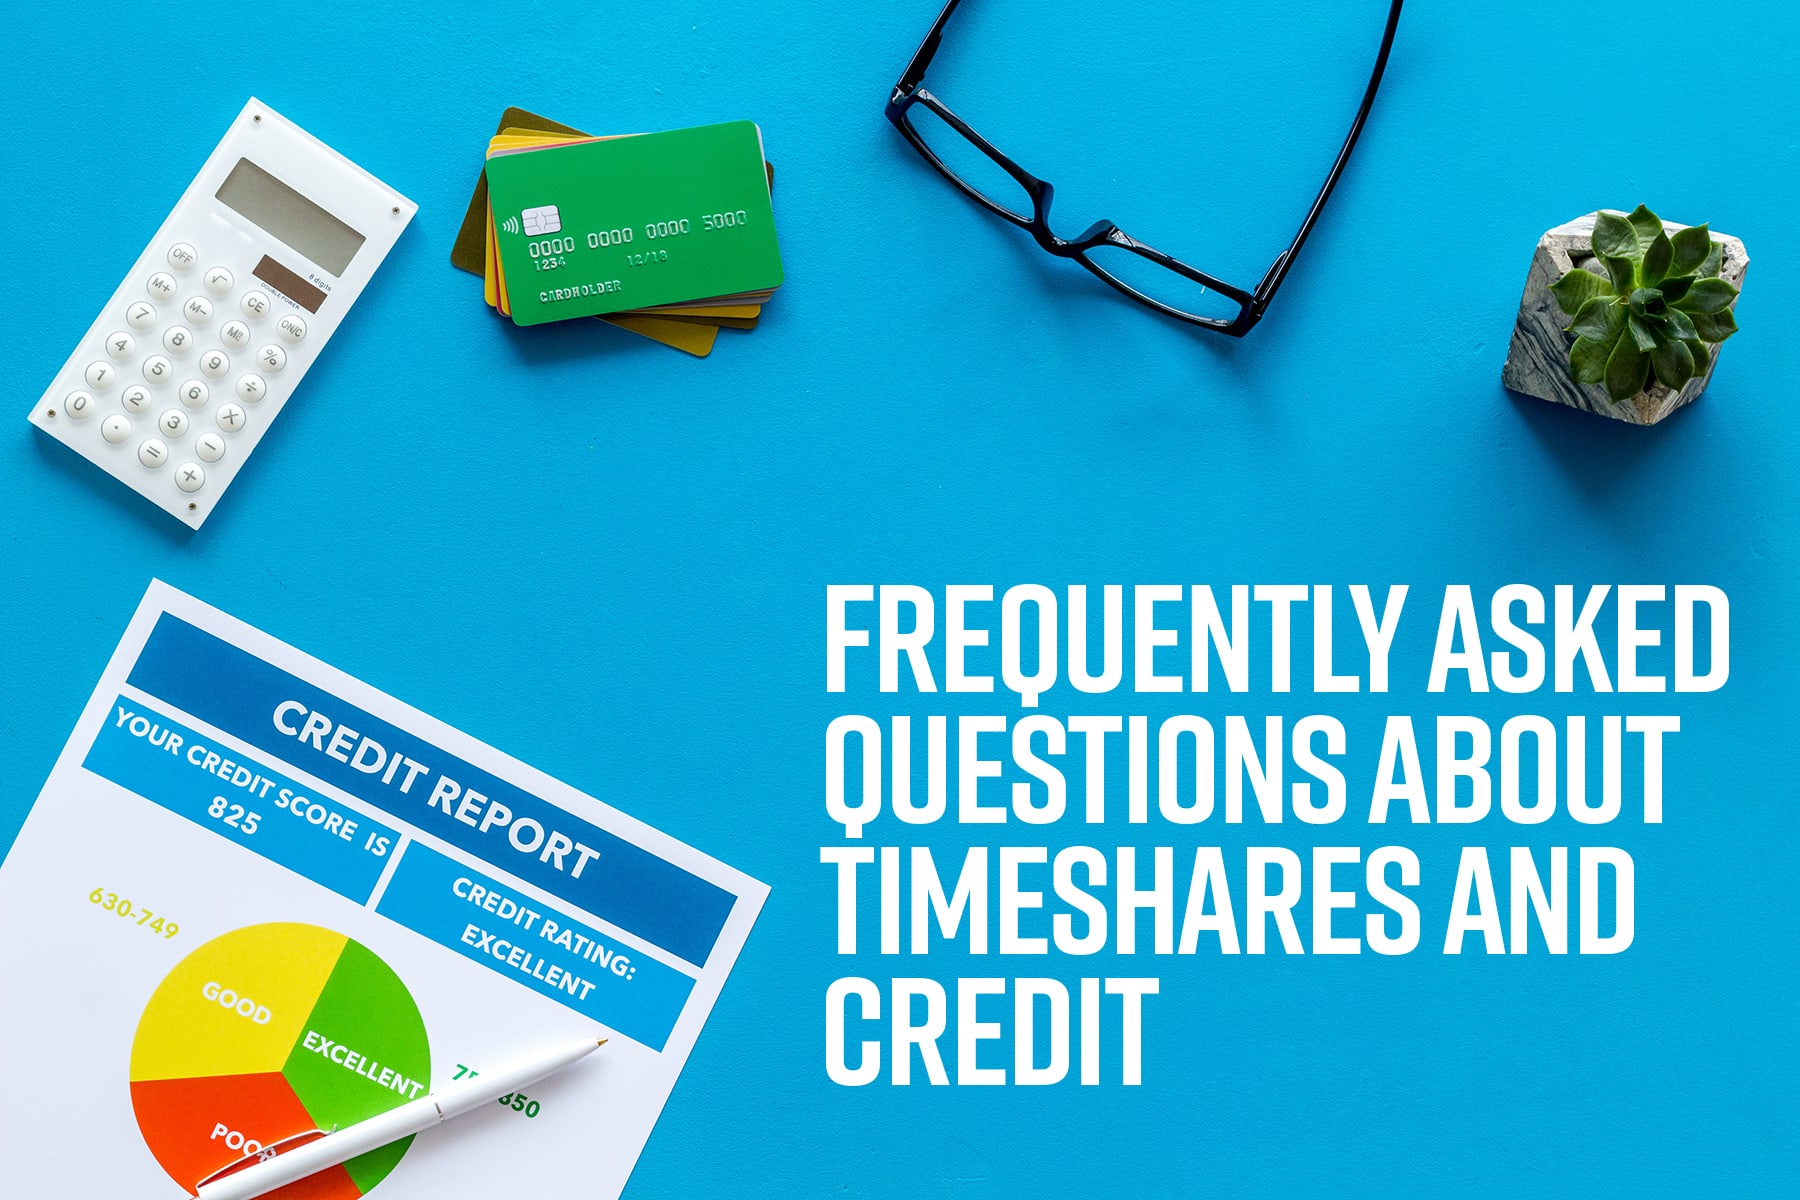 Frequently asked questions about timeshares and credit